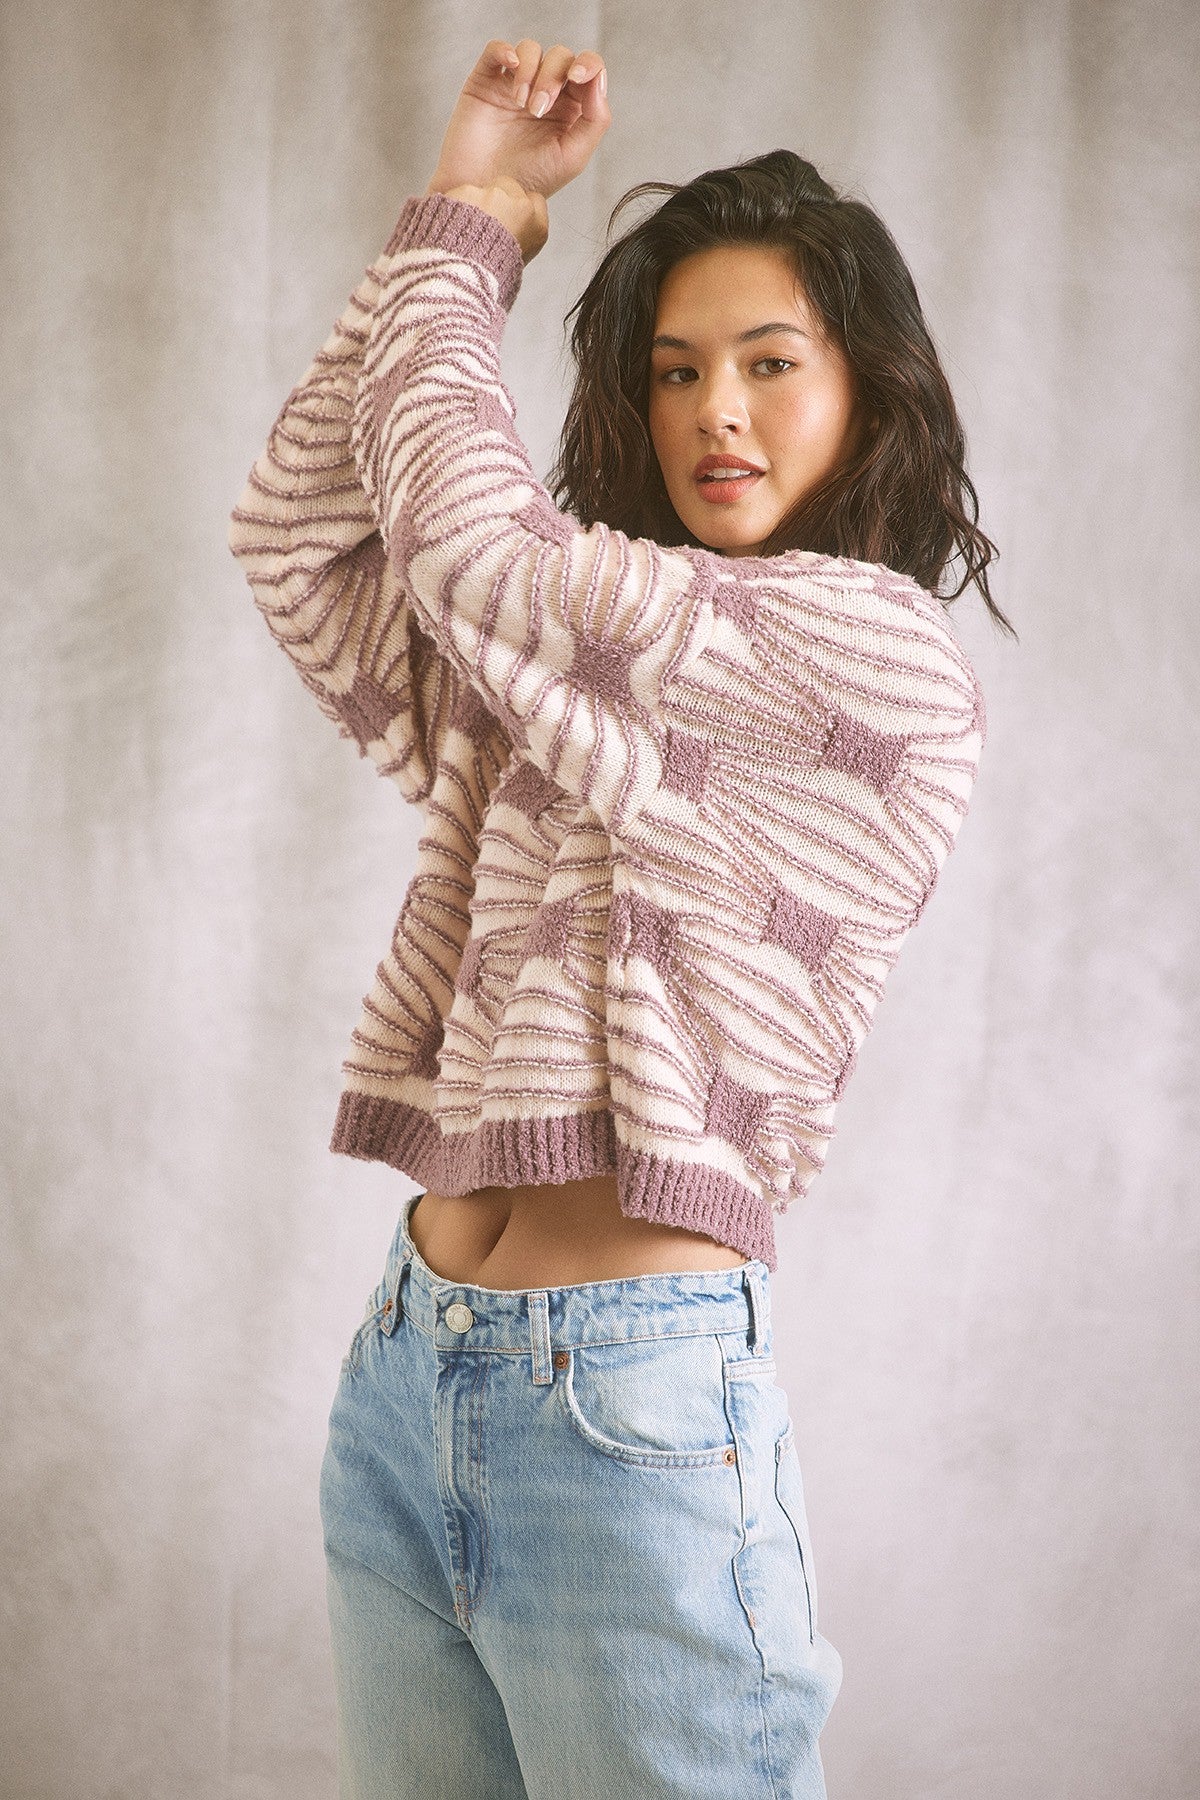 The Sweetly Spoken Ash Lilac Patterned Sweater